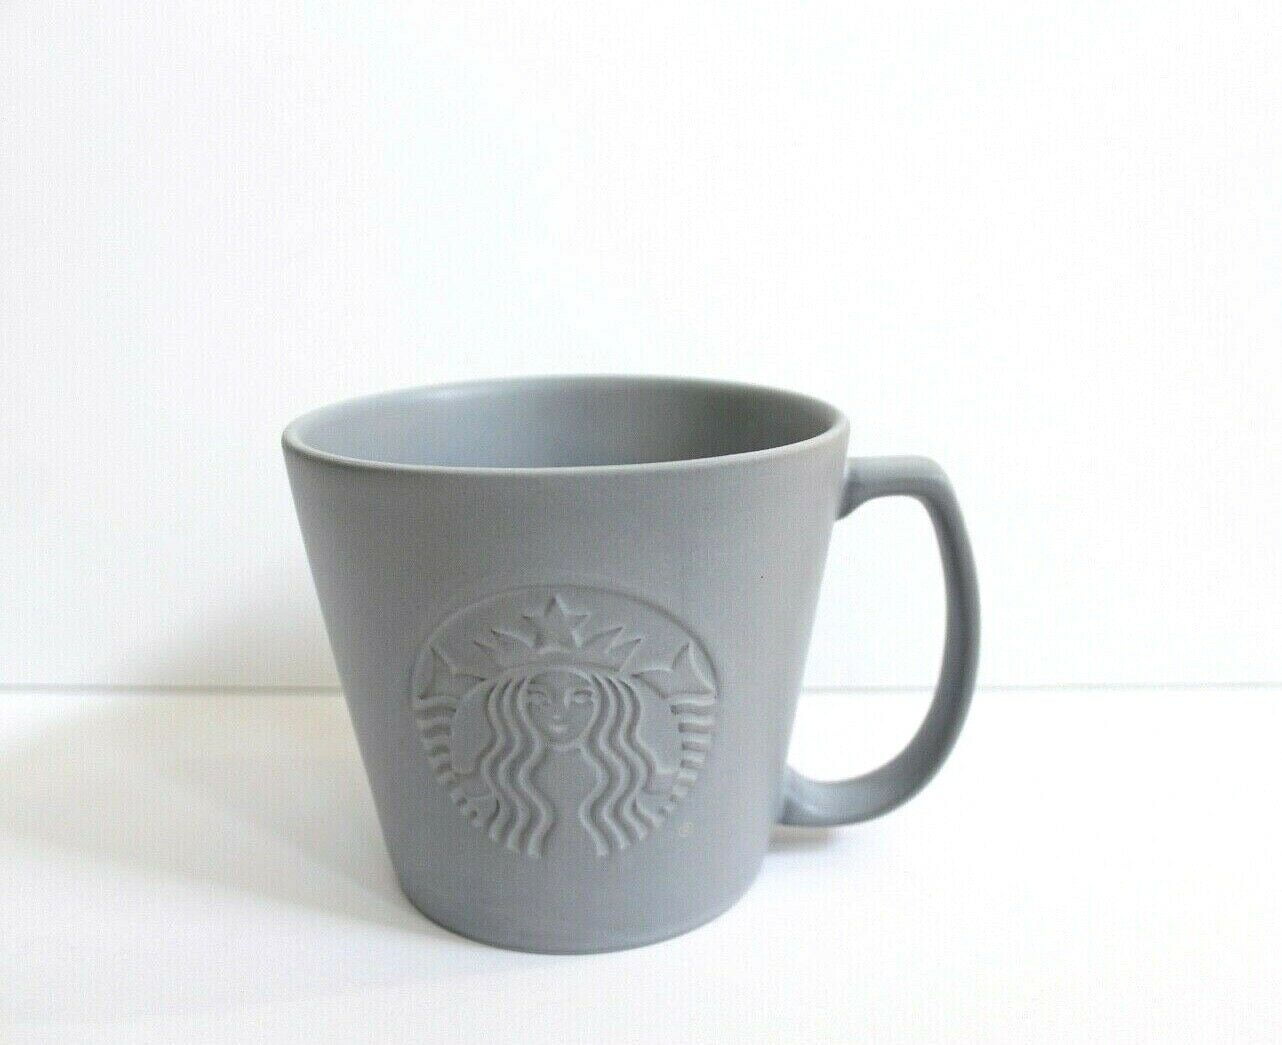 for sale online Starbucks Est 1971 Stainless Steel 2016 Silver Coffee Mug Cup 12 Oz 